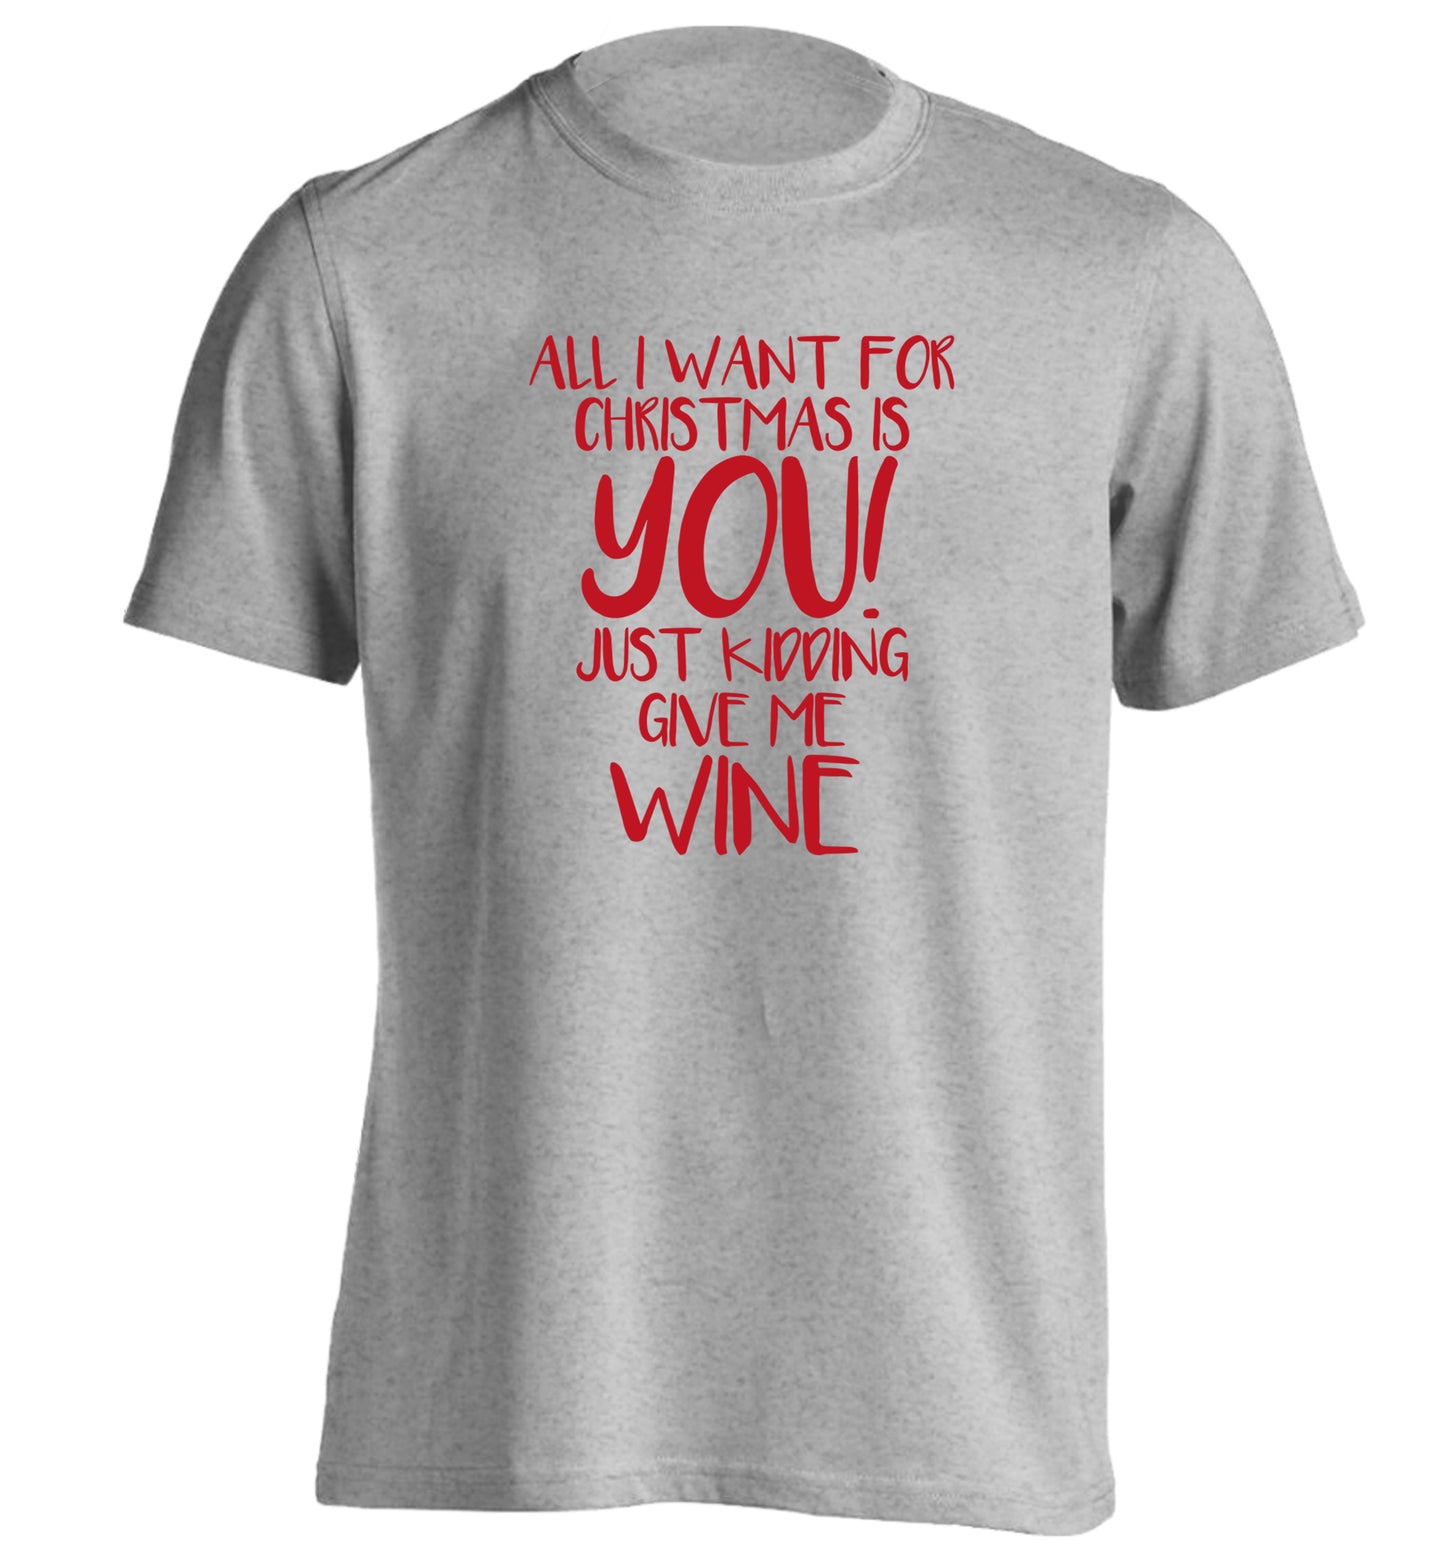 All I want for christmas is you just kidding give me the wine adults unisex grey Tshirt 2XL